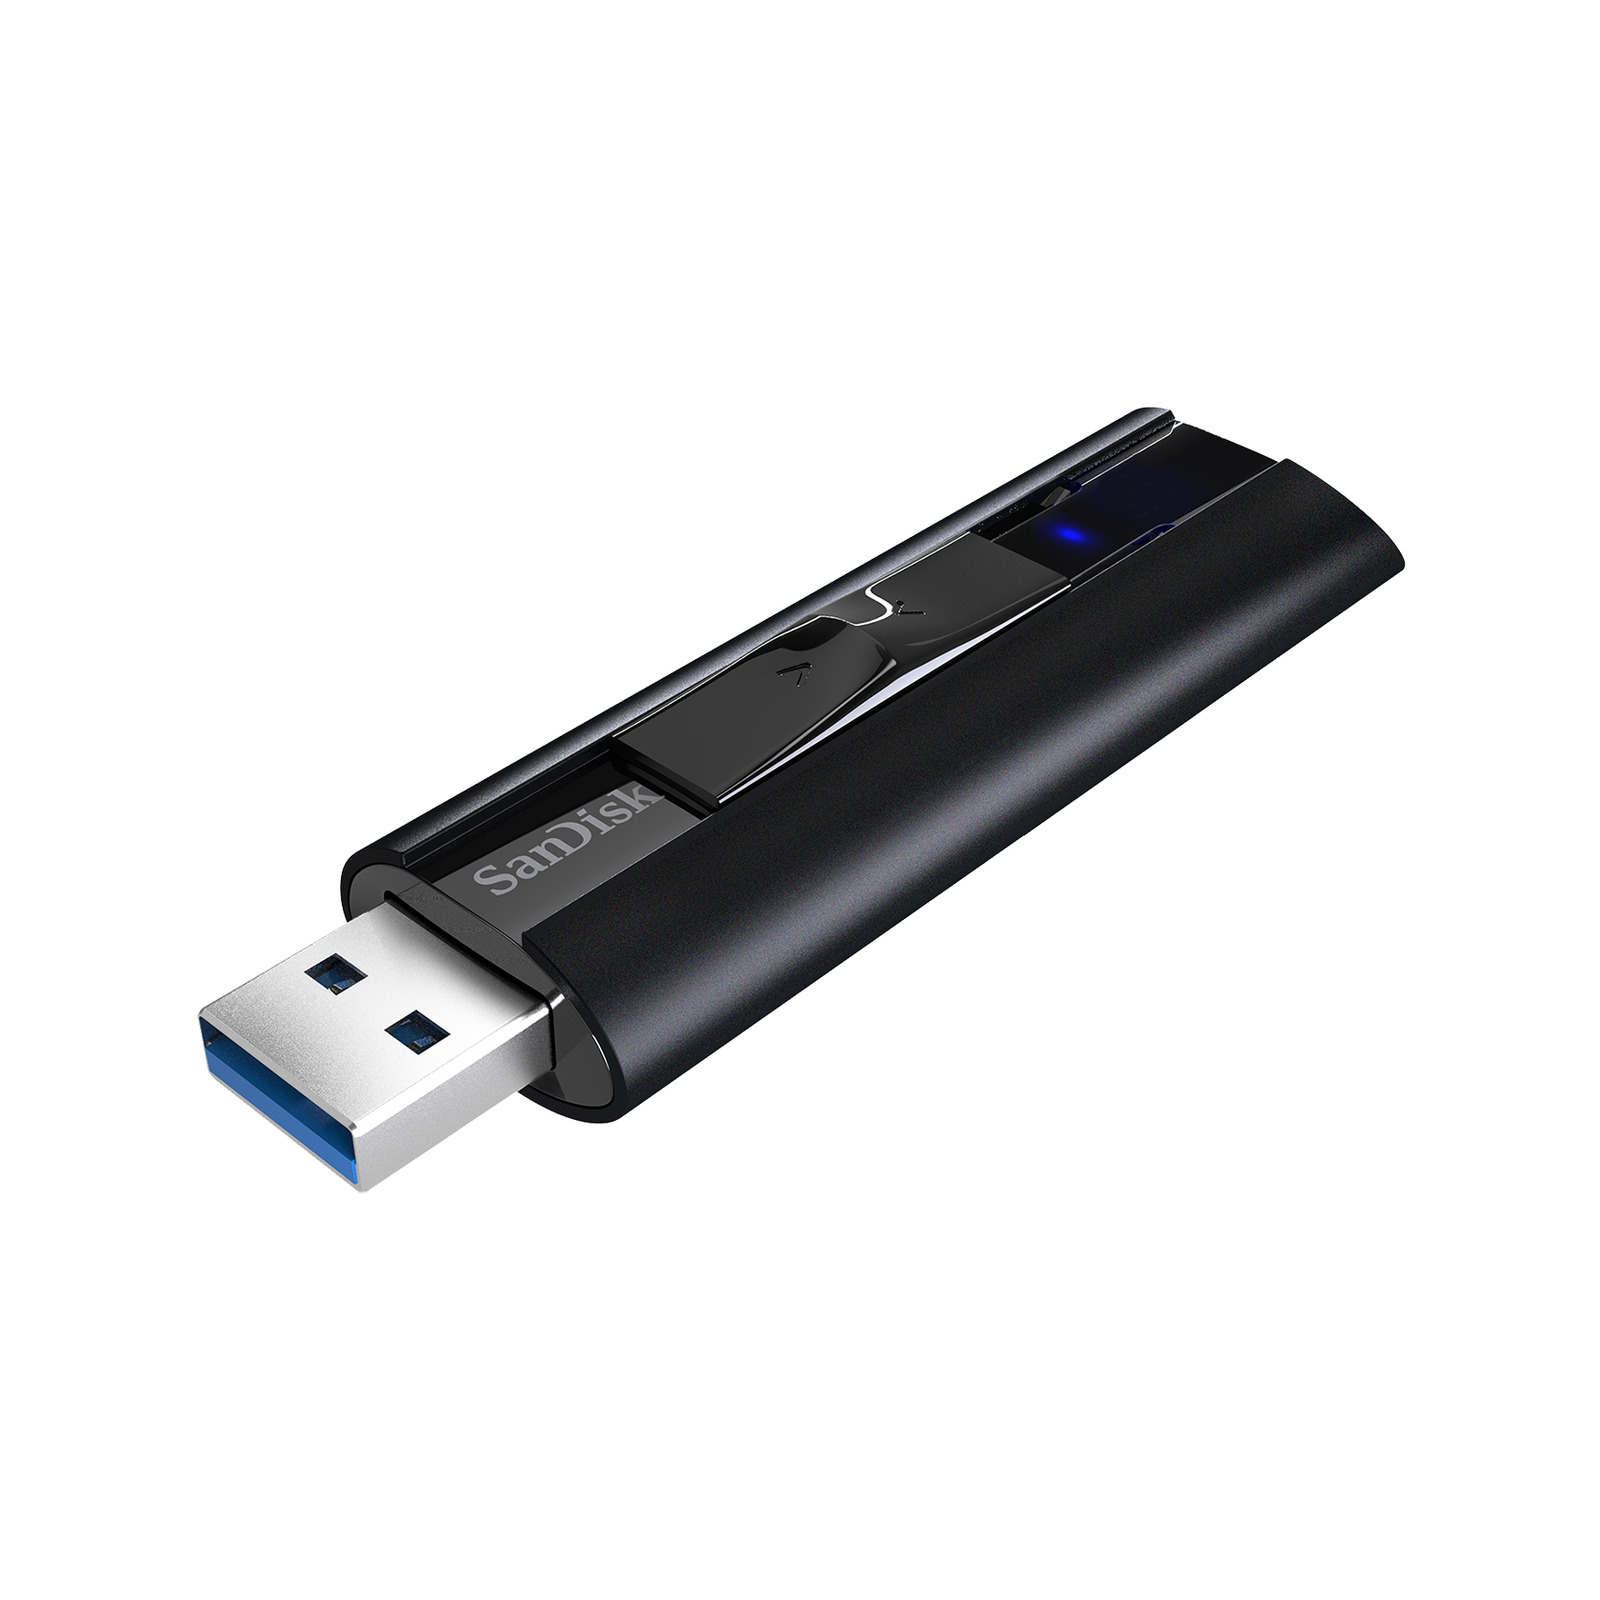 SanDisk 512GB Extreme PRO USB 3.2 Solid State Flash Drive - SDCZ880-512G-G46